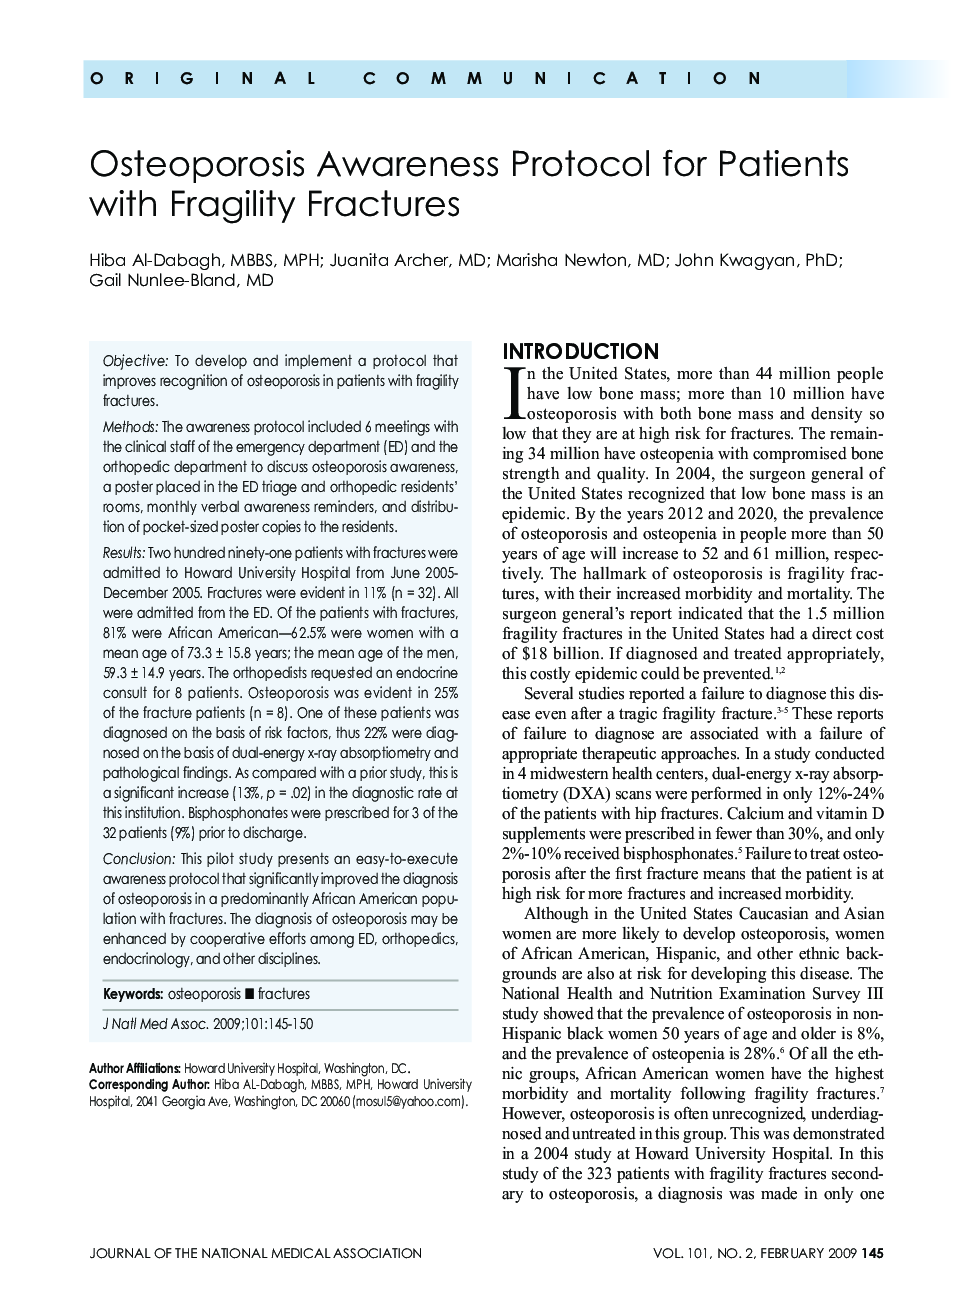 Osteoporosis Awareness Protocol for Patients with Fragility Fractures